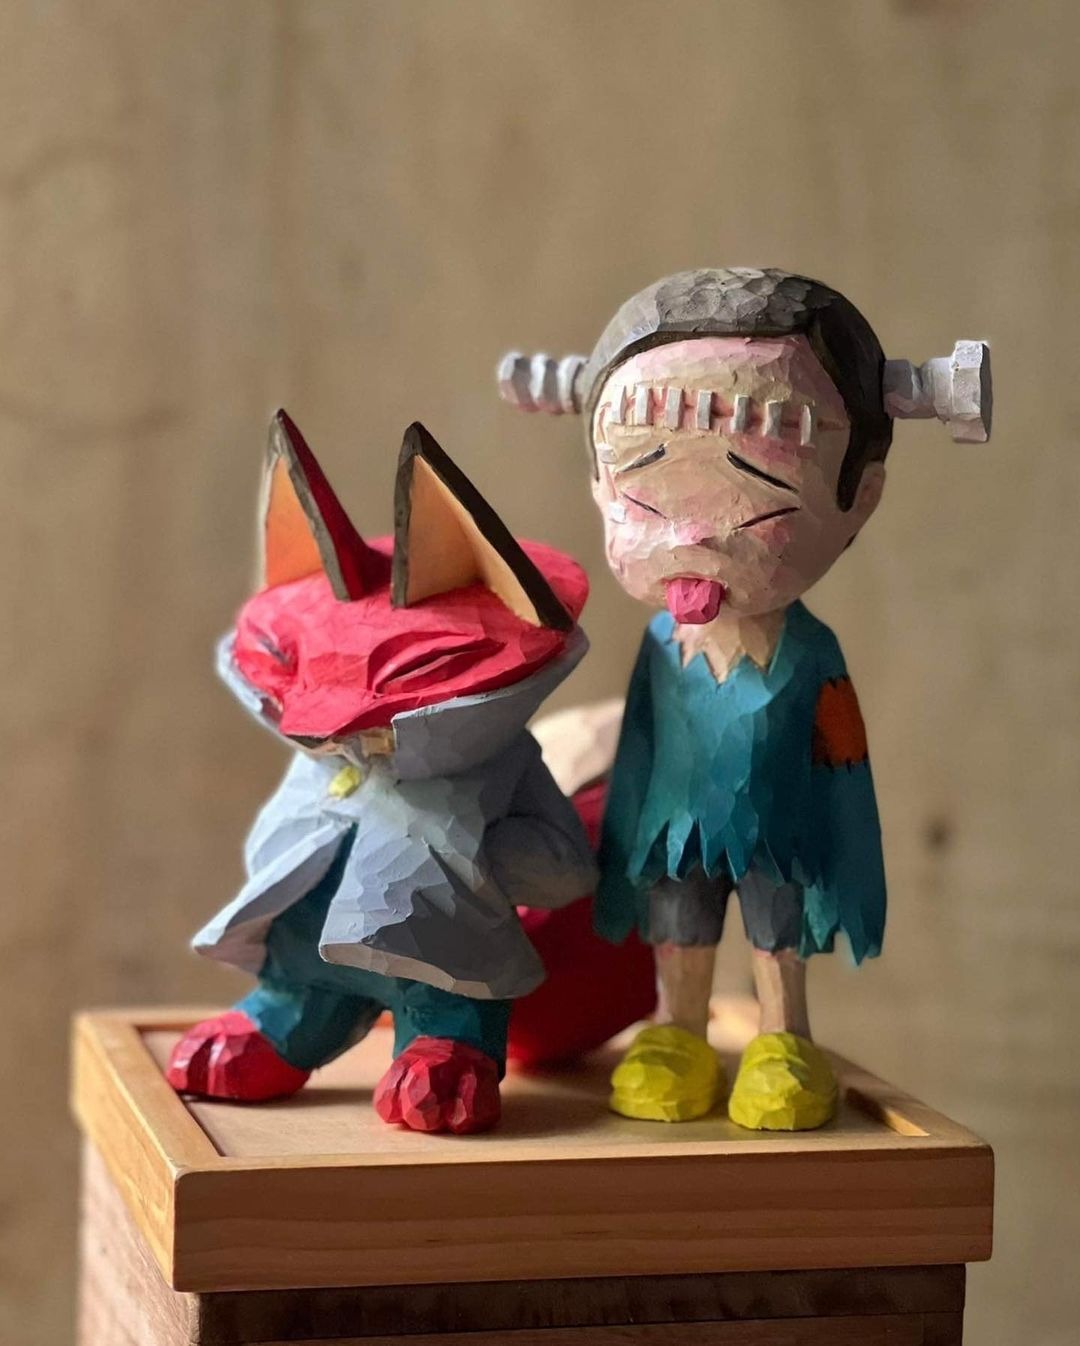 The wood sculptures journey of Fat Fox and Moon